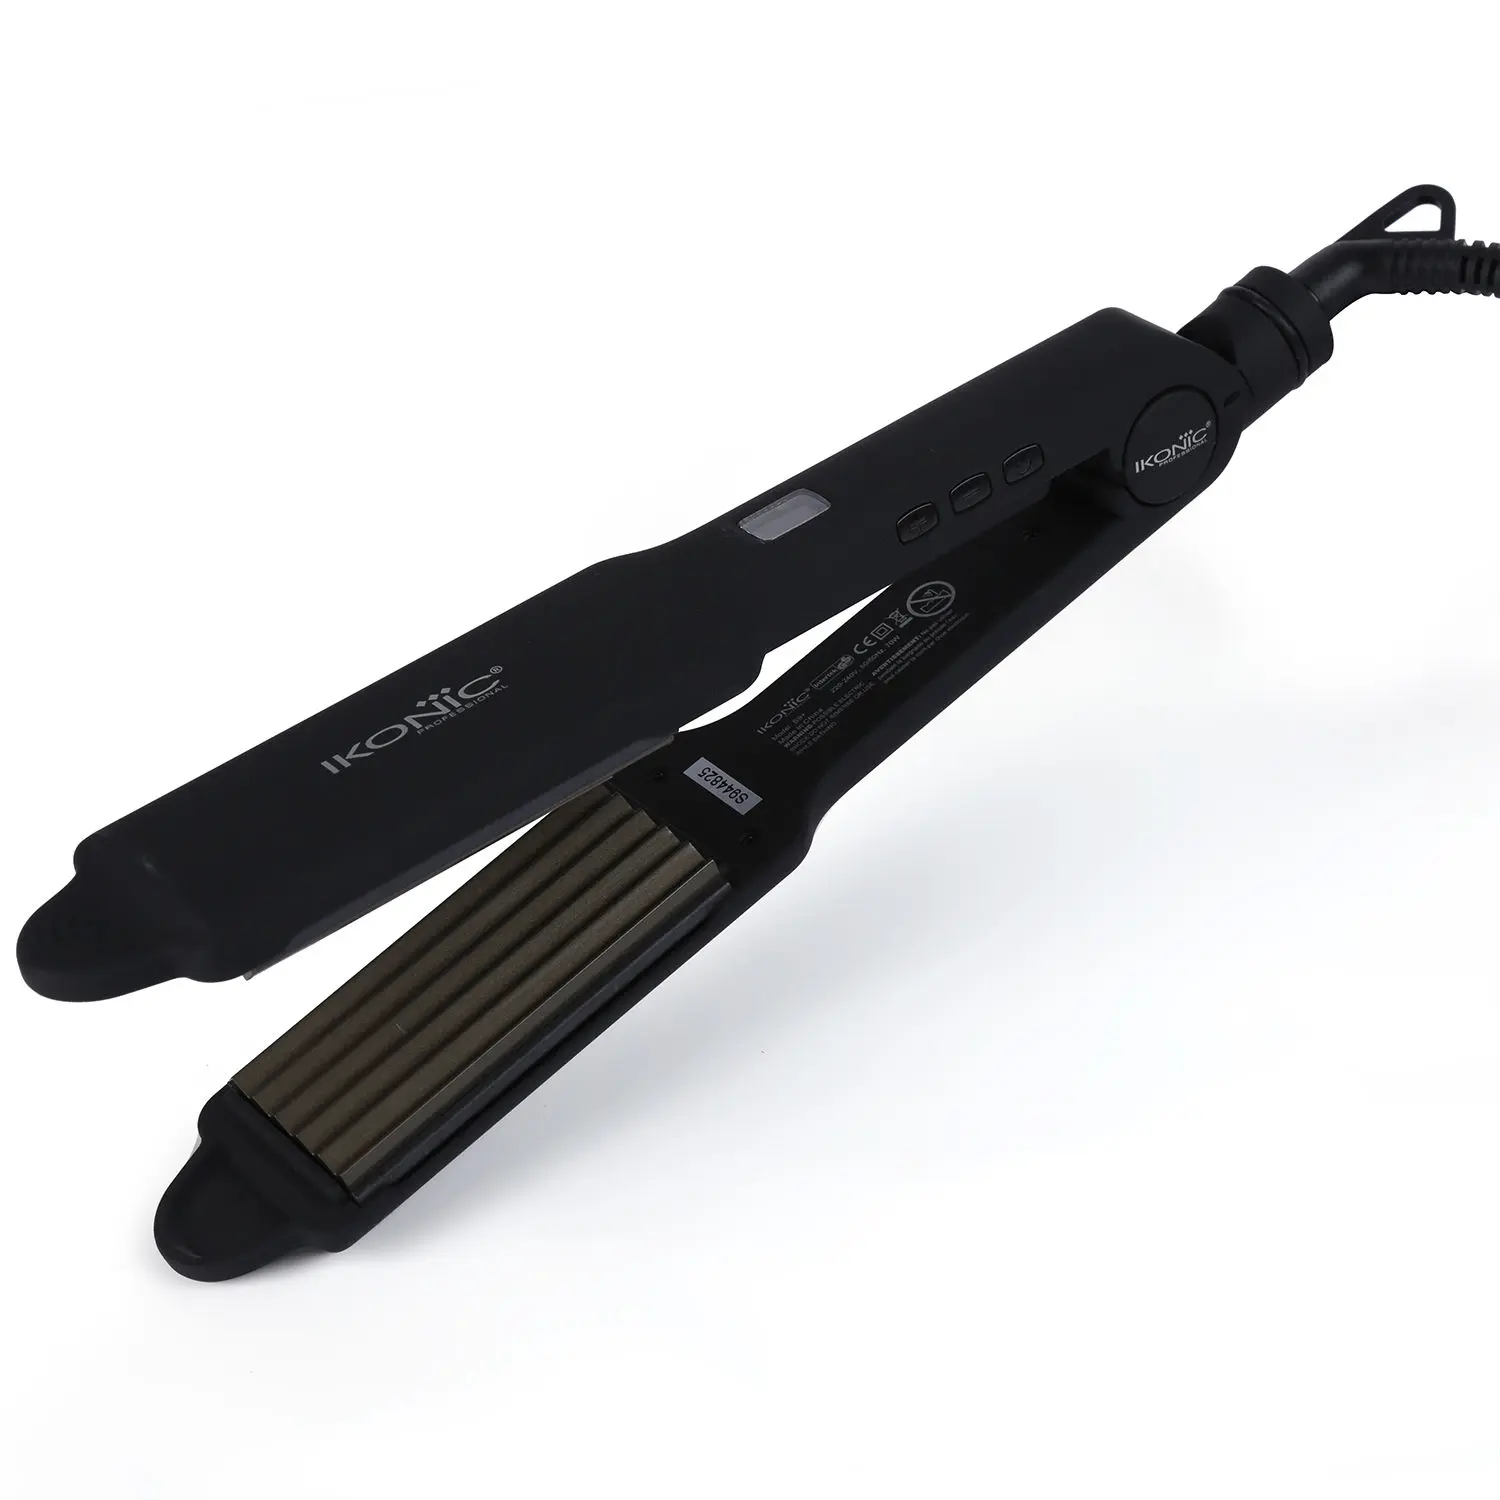 Ikonic Crimper - S9+ | Black | Ceramic Tourmaline | Corded Electric | Hair Type - All | Heating Temperature - Up To 230 Degrees Celsius